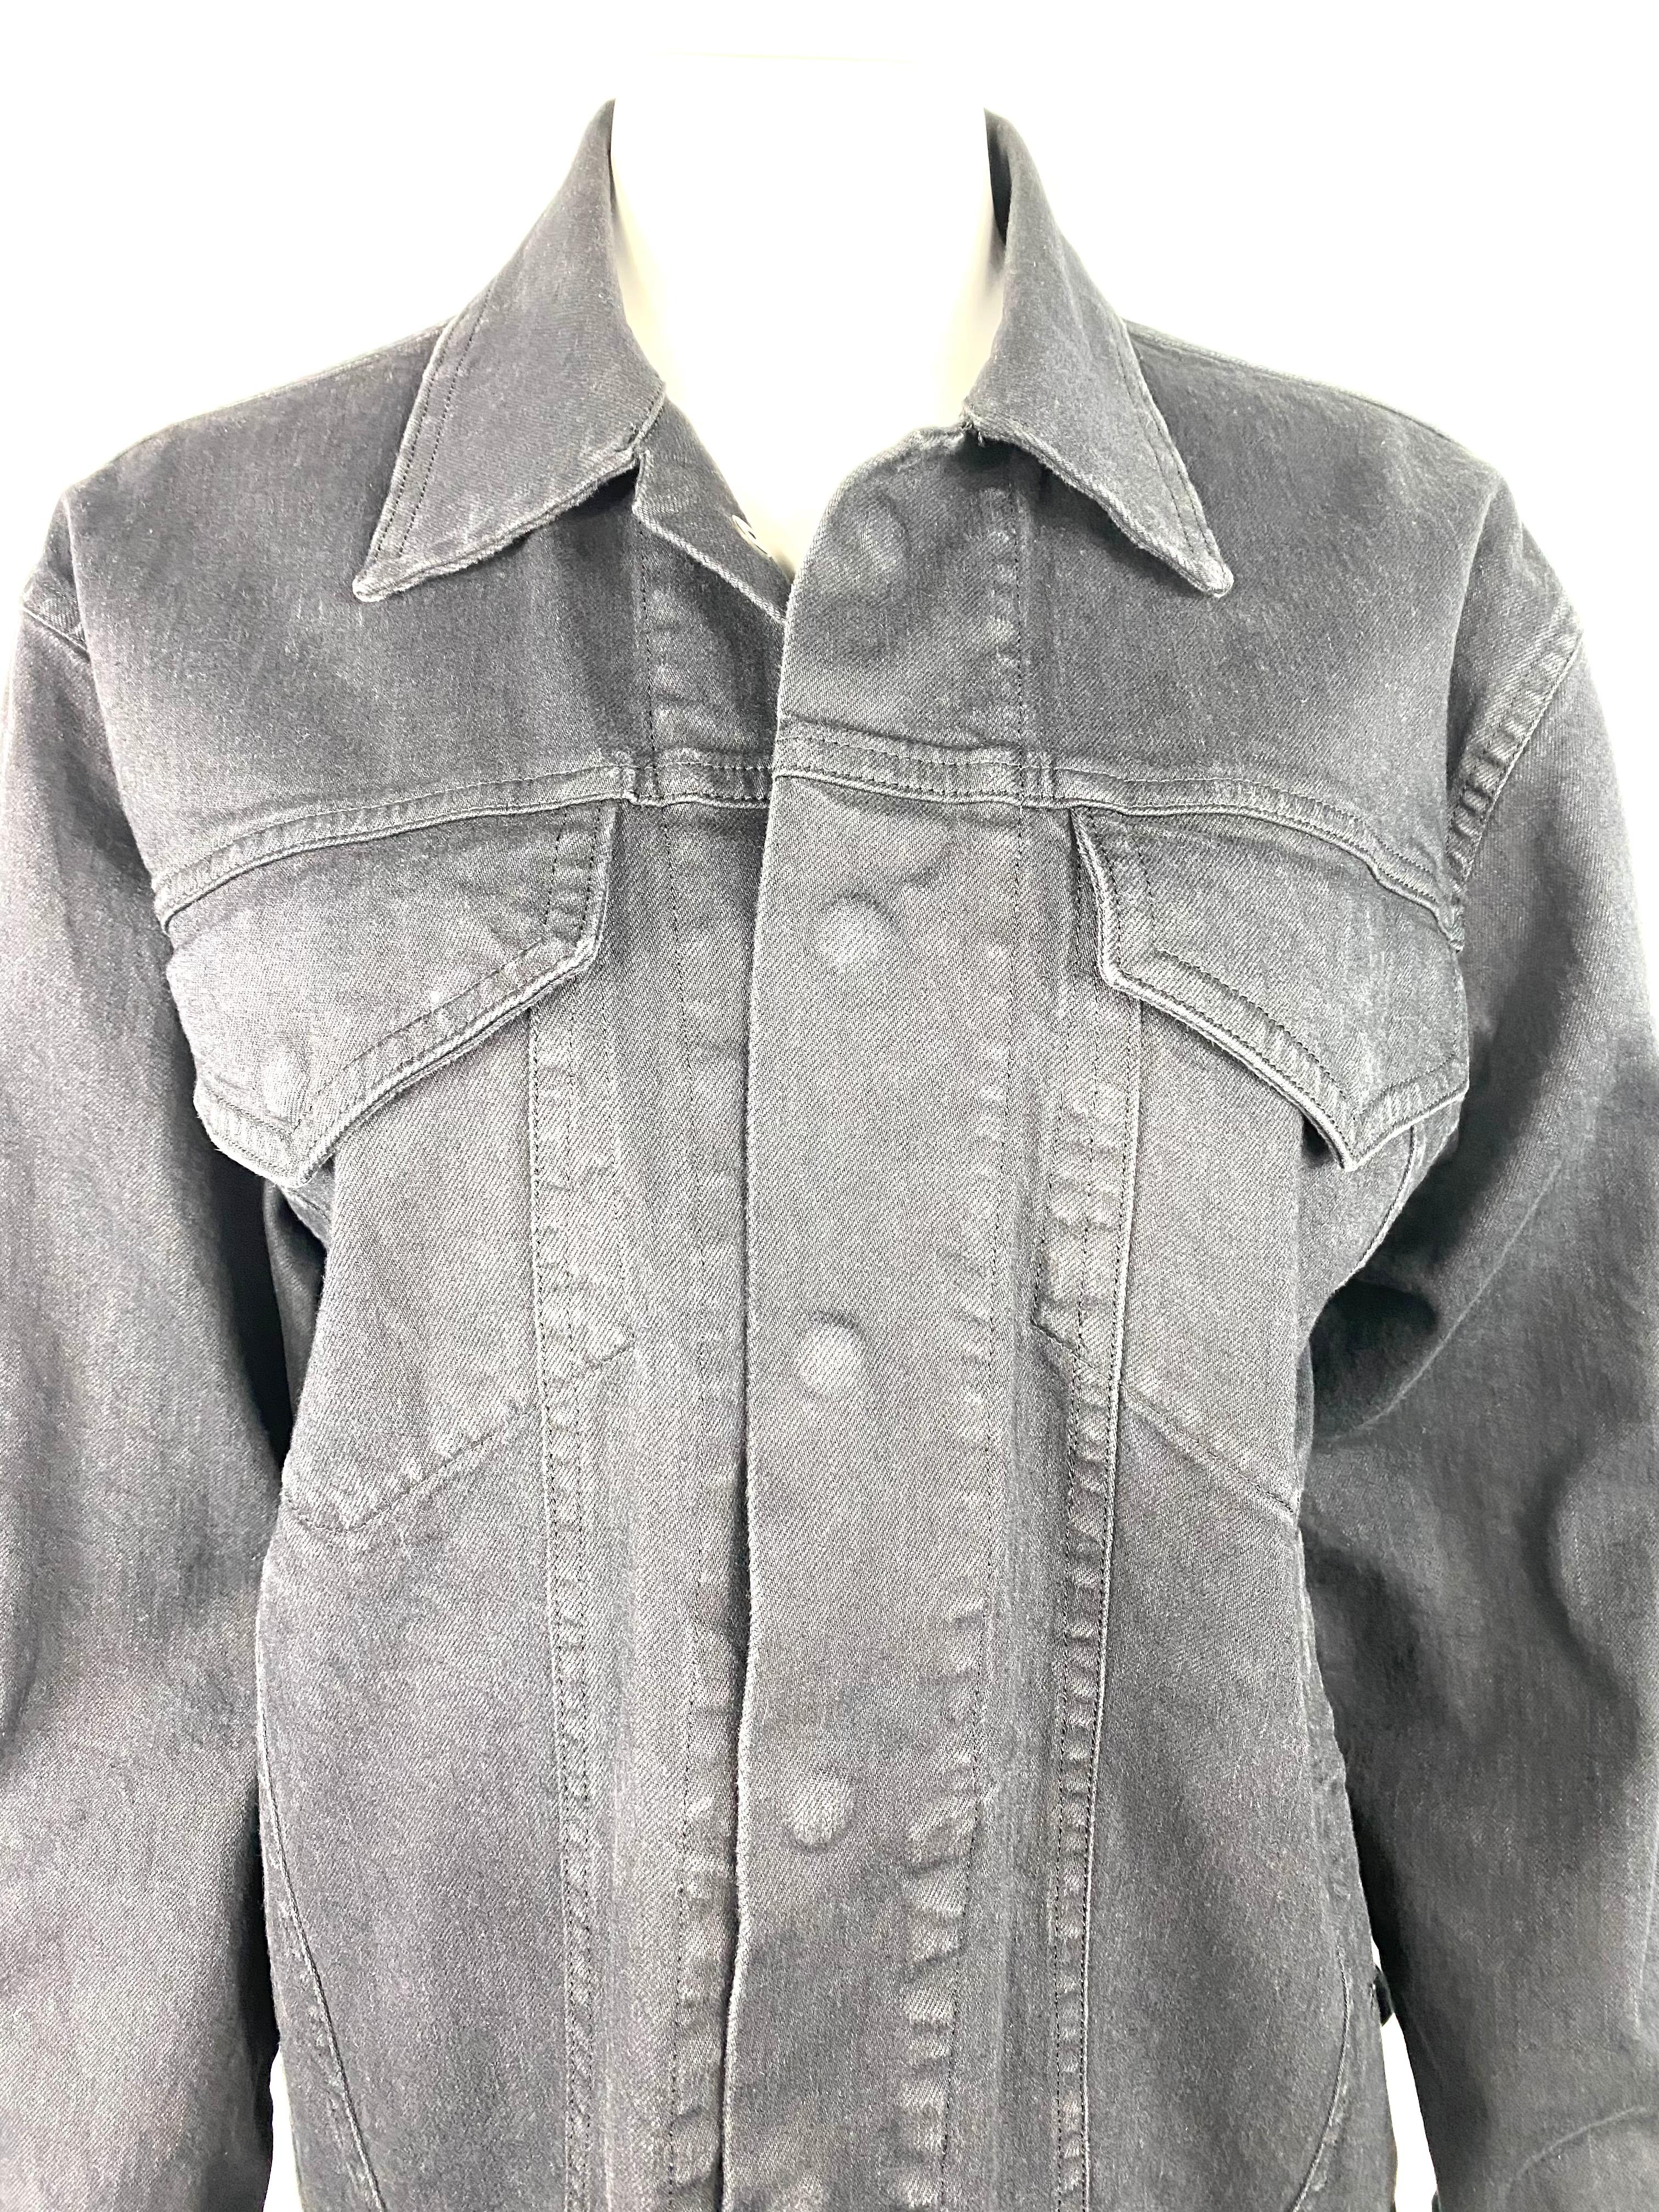 Product details:

The jacket features light grey wash color with front button closure, dual front pockets, side zip slits (9.5